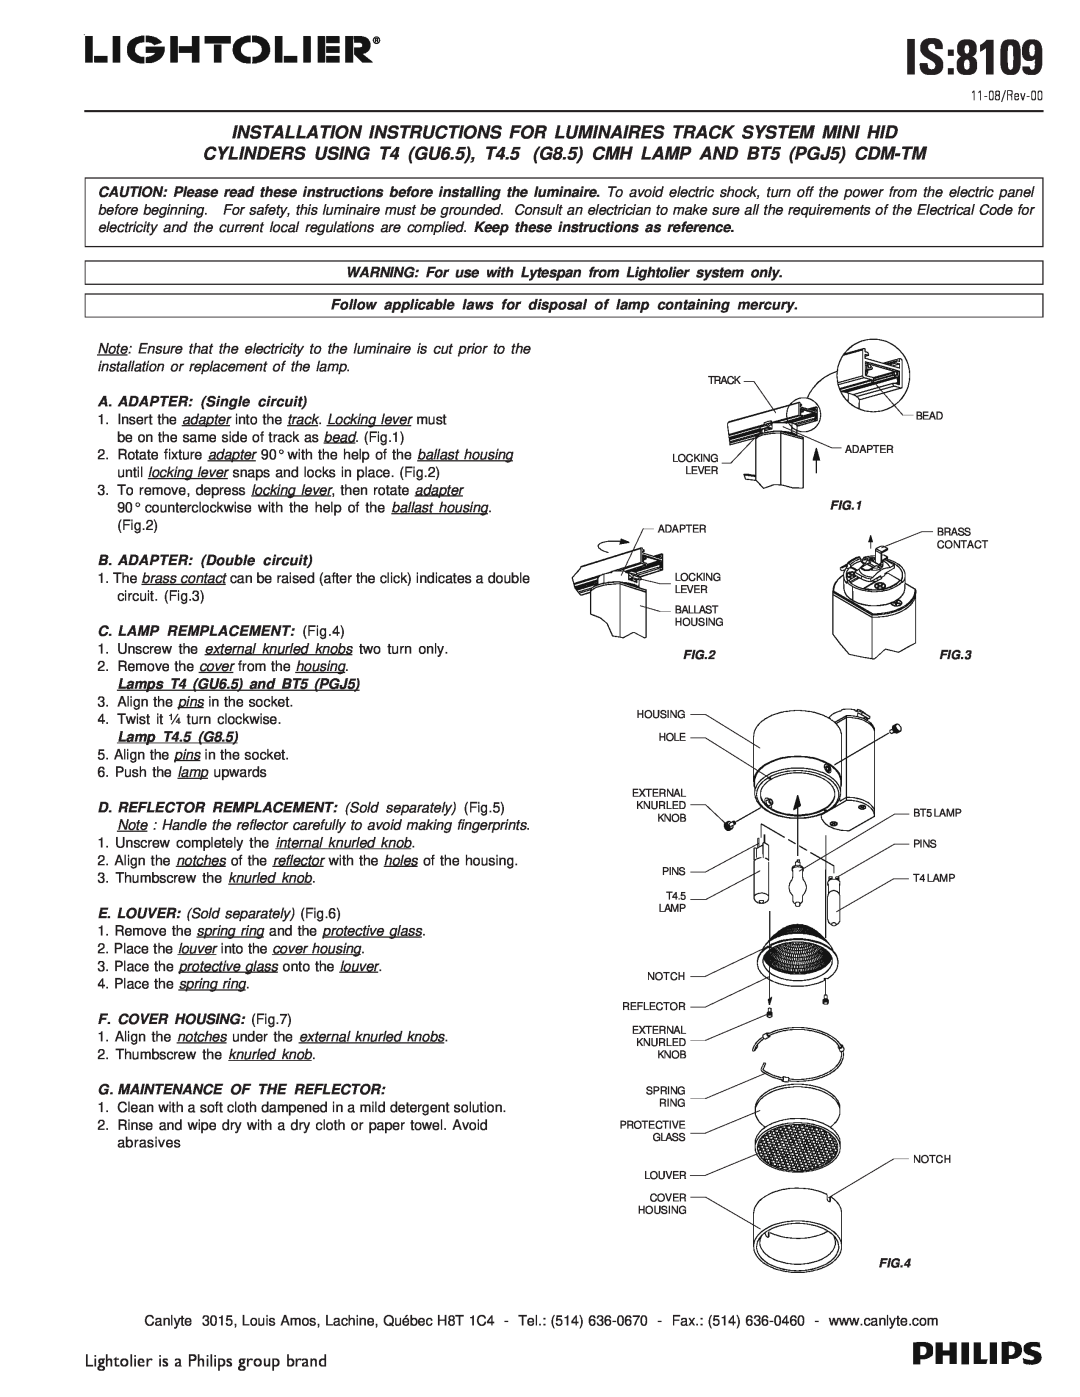 Lightolier 8109 installation instructions Is, Lightolier is a Philips group brand 